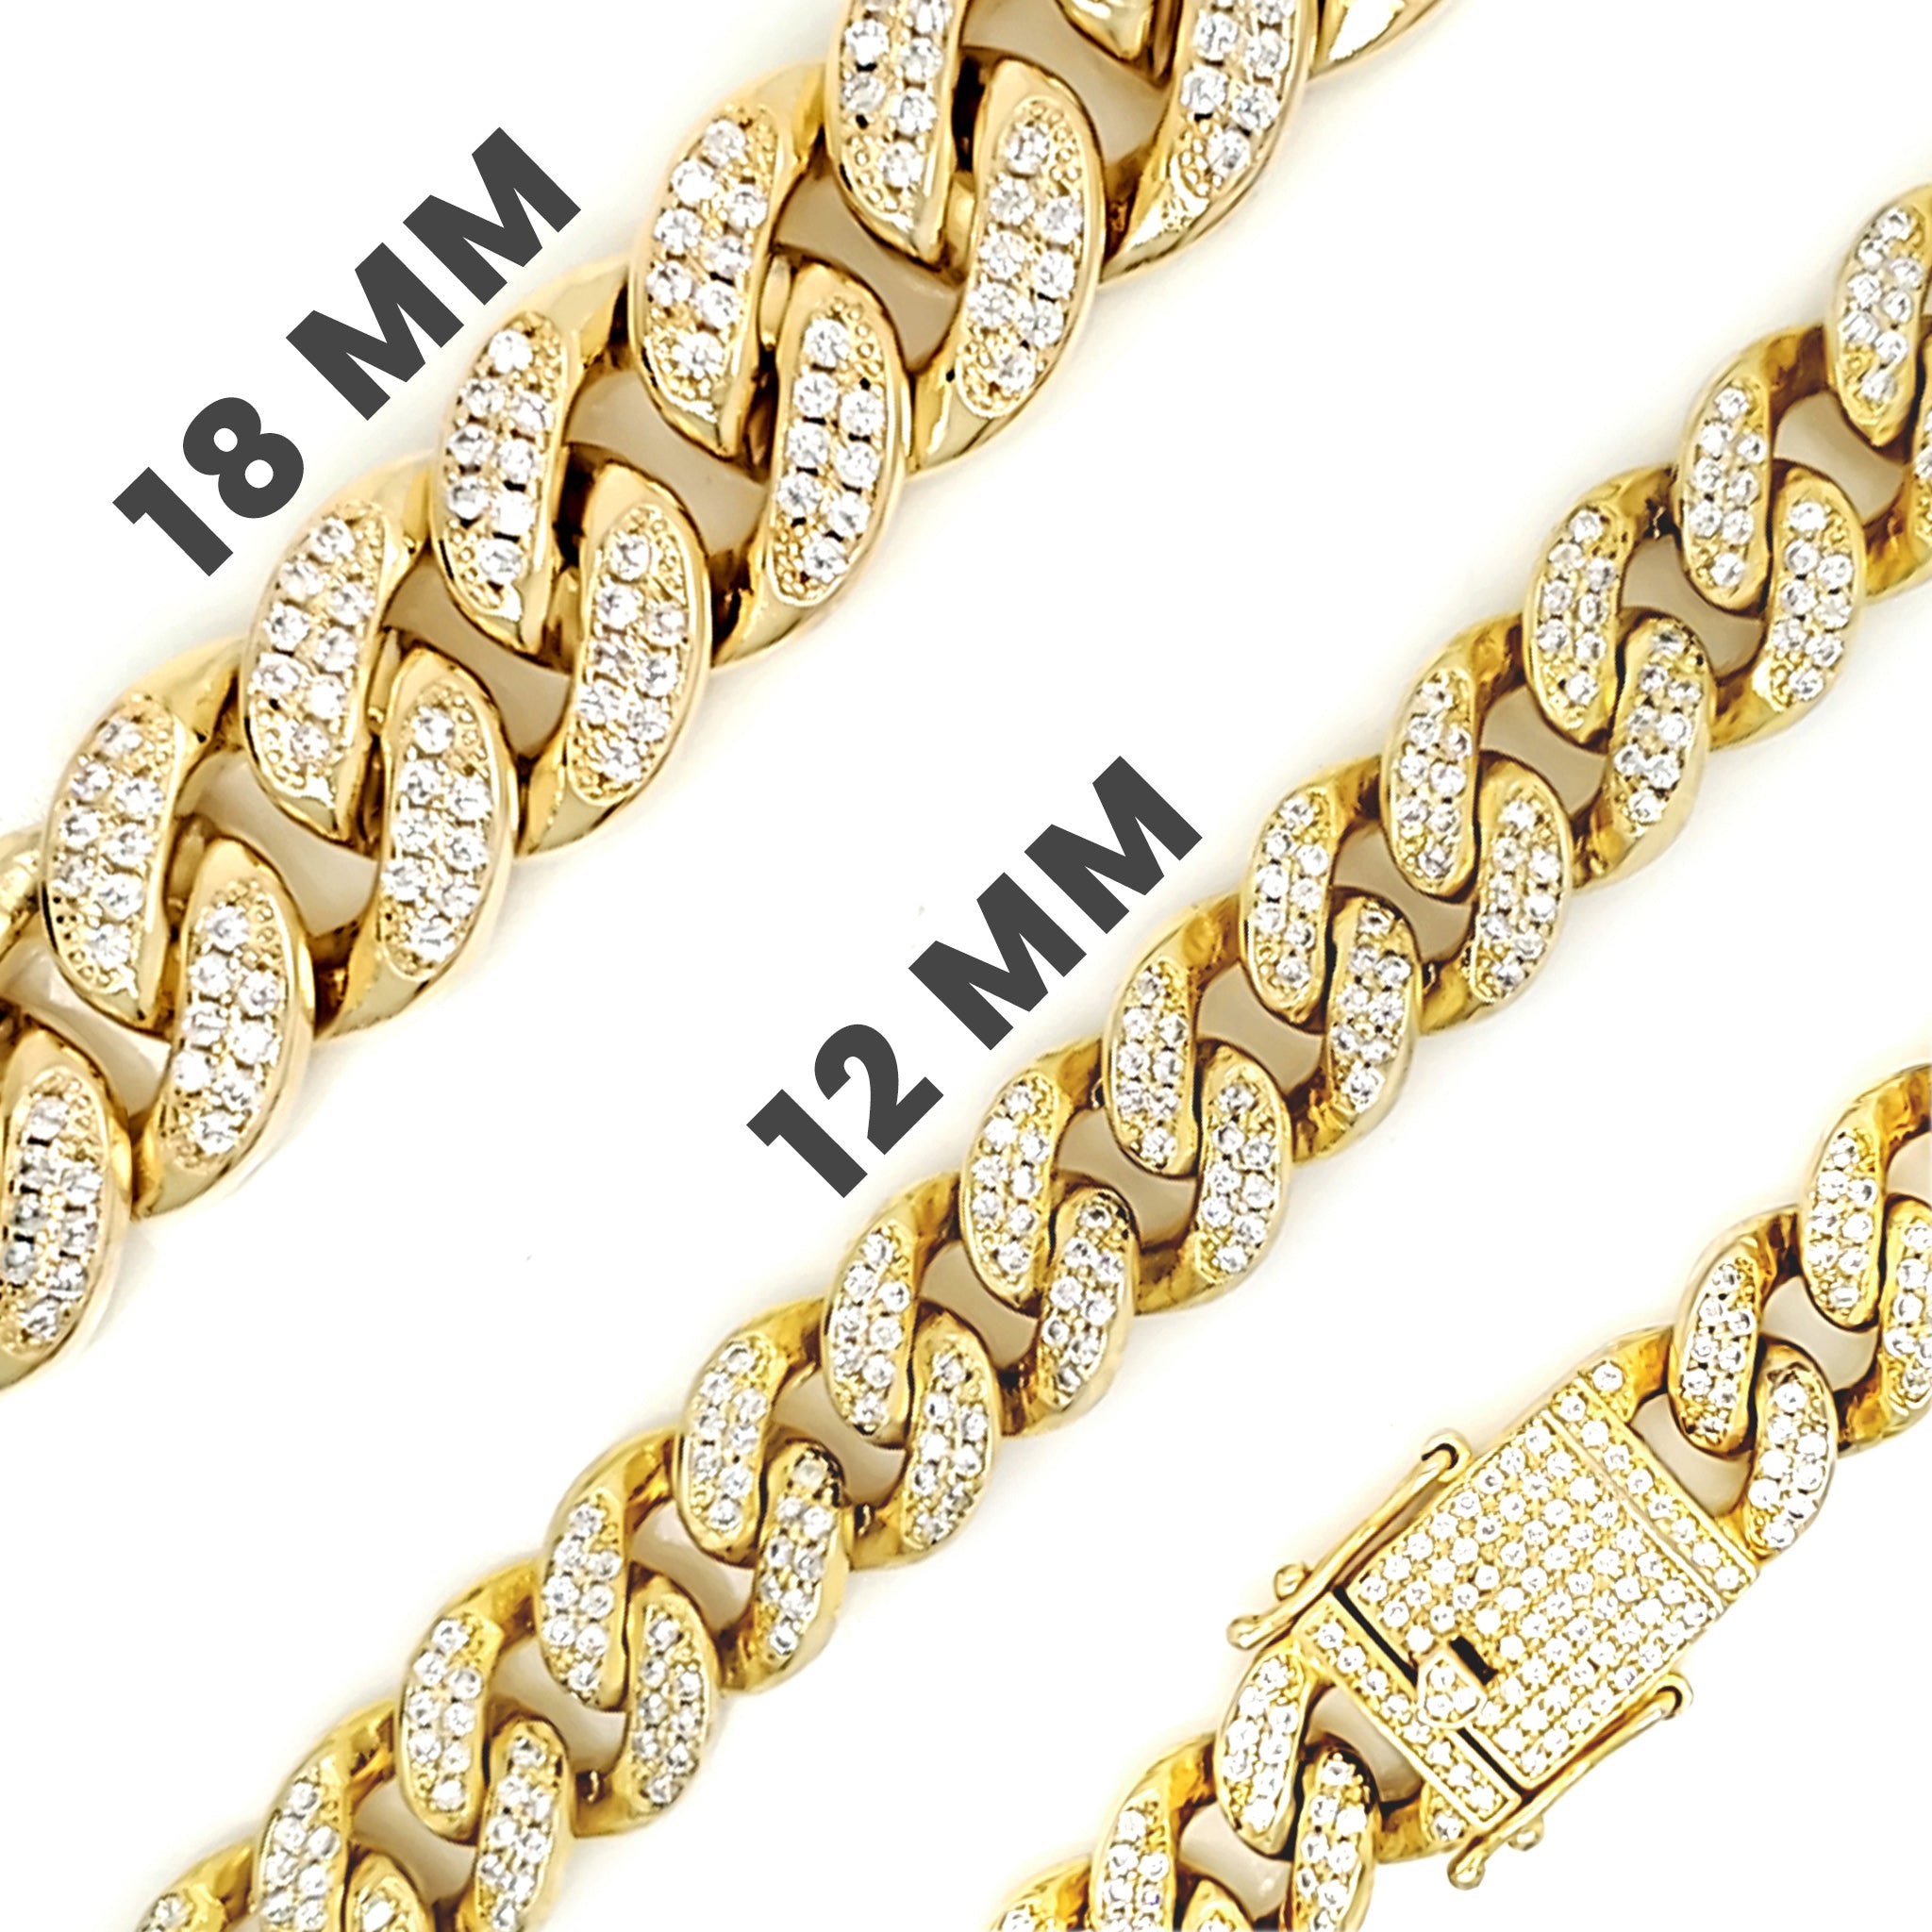 YOUBEIYEE 32.8 Feet/10M KC Gold Plated Brass Jewelry Making Chain Bulk  Women Necklace Chains Roll Beads Cable Link Chains for Jewelry Making DIY